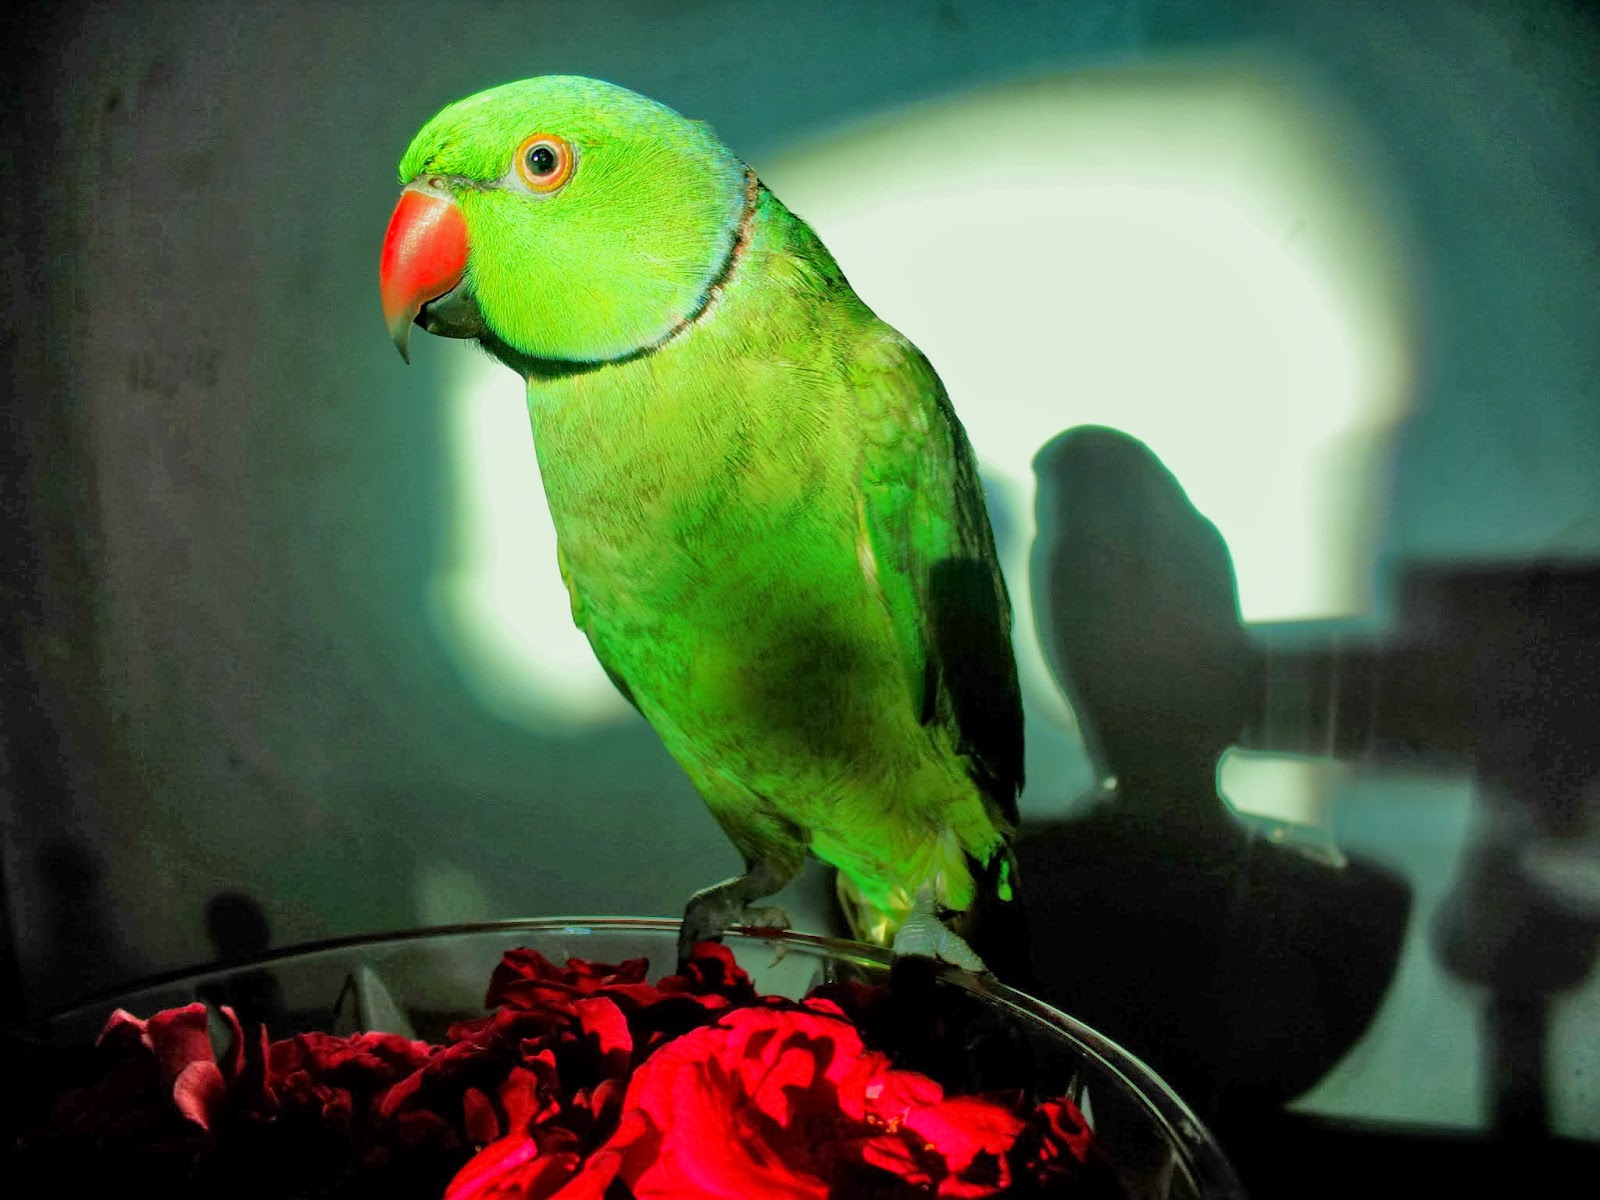 Parrot Wallpapers - Green Parrot Image Download , HD Wallpaper & Backgrounds